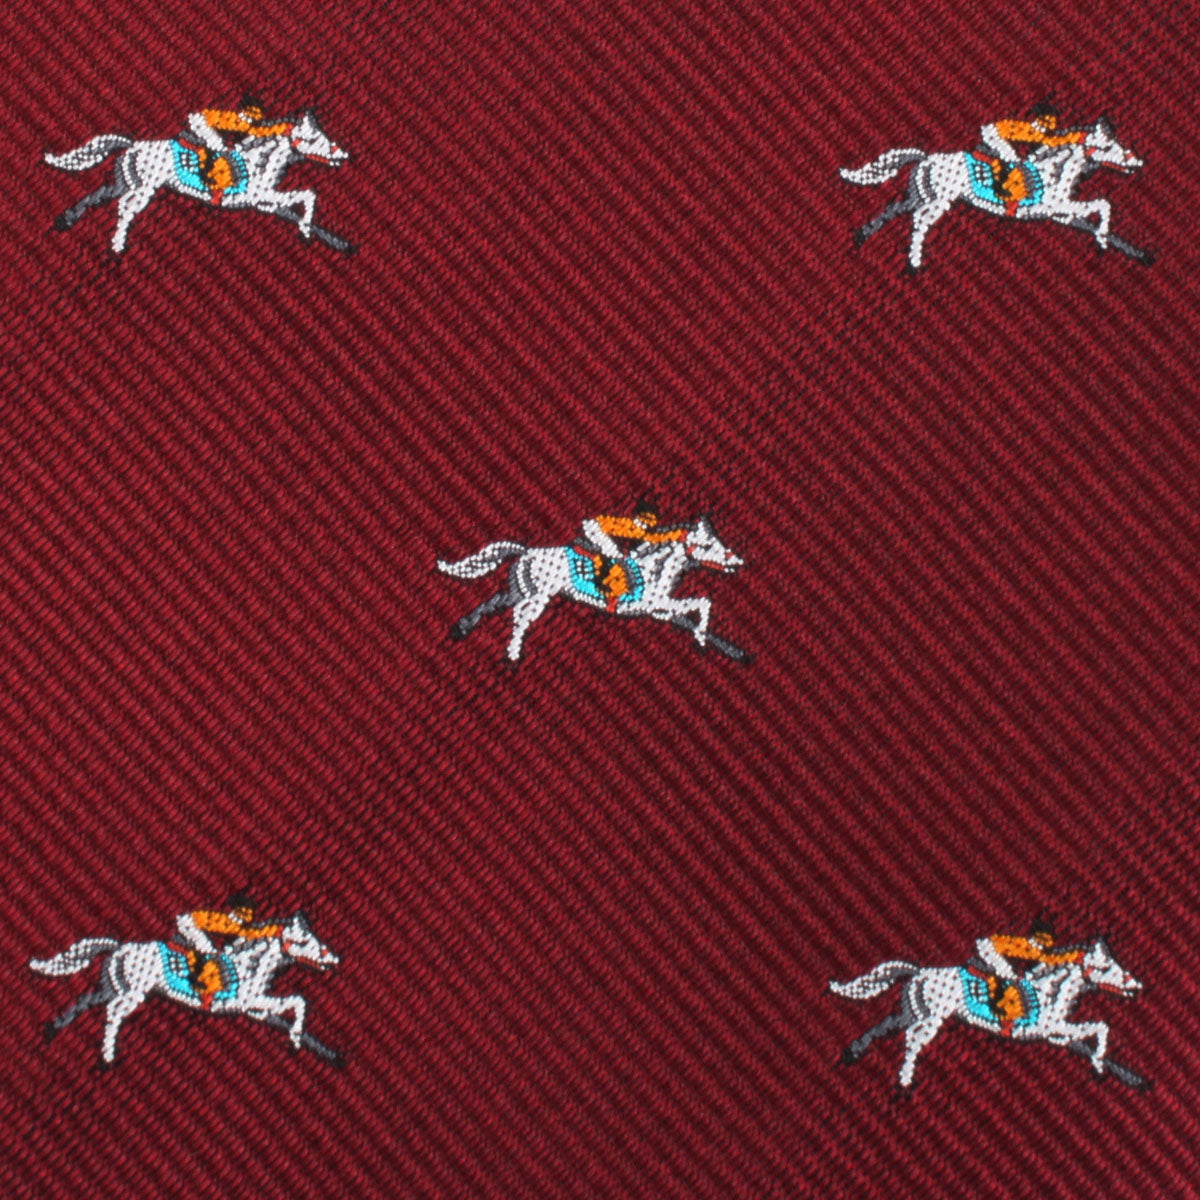 Kentucky Derby Race Horse Pocket Square Fabric